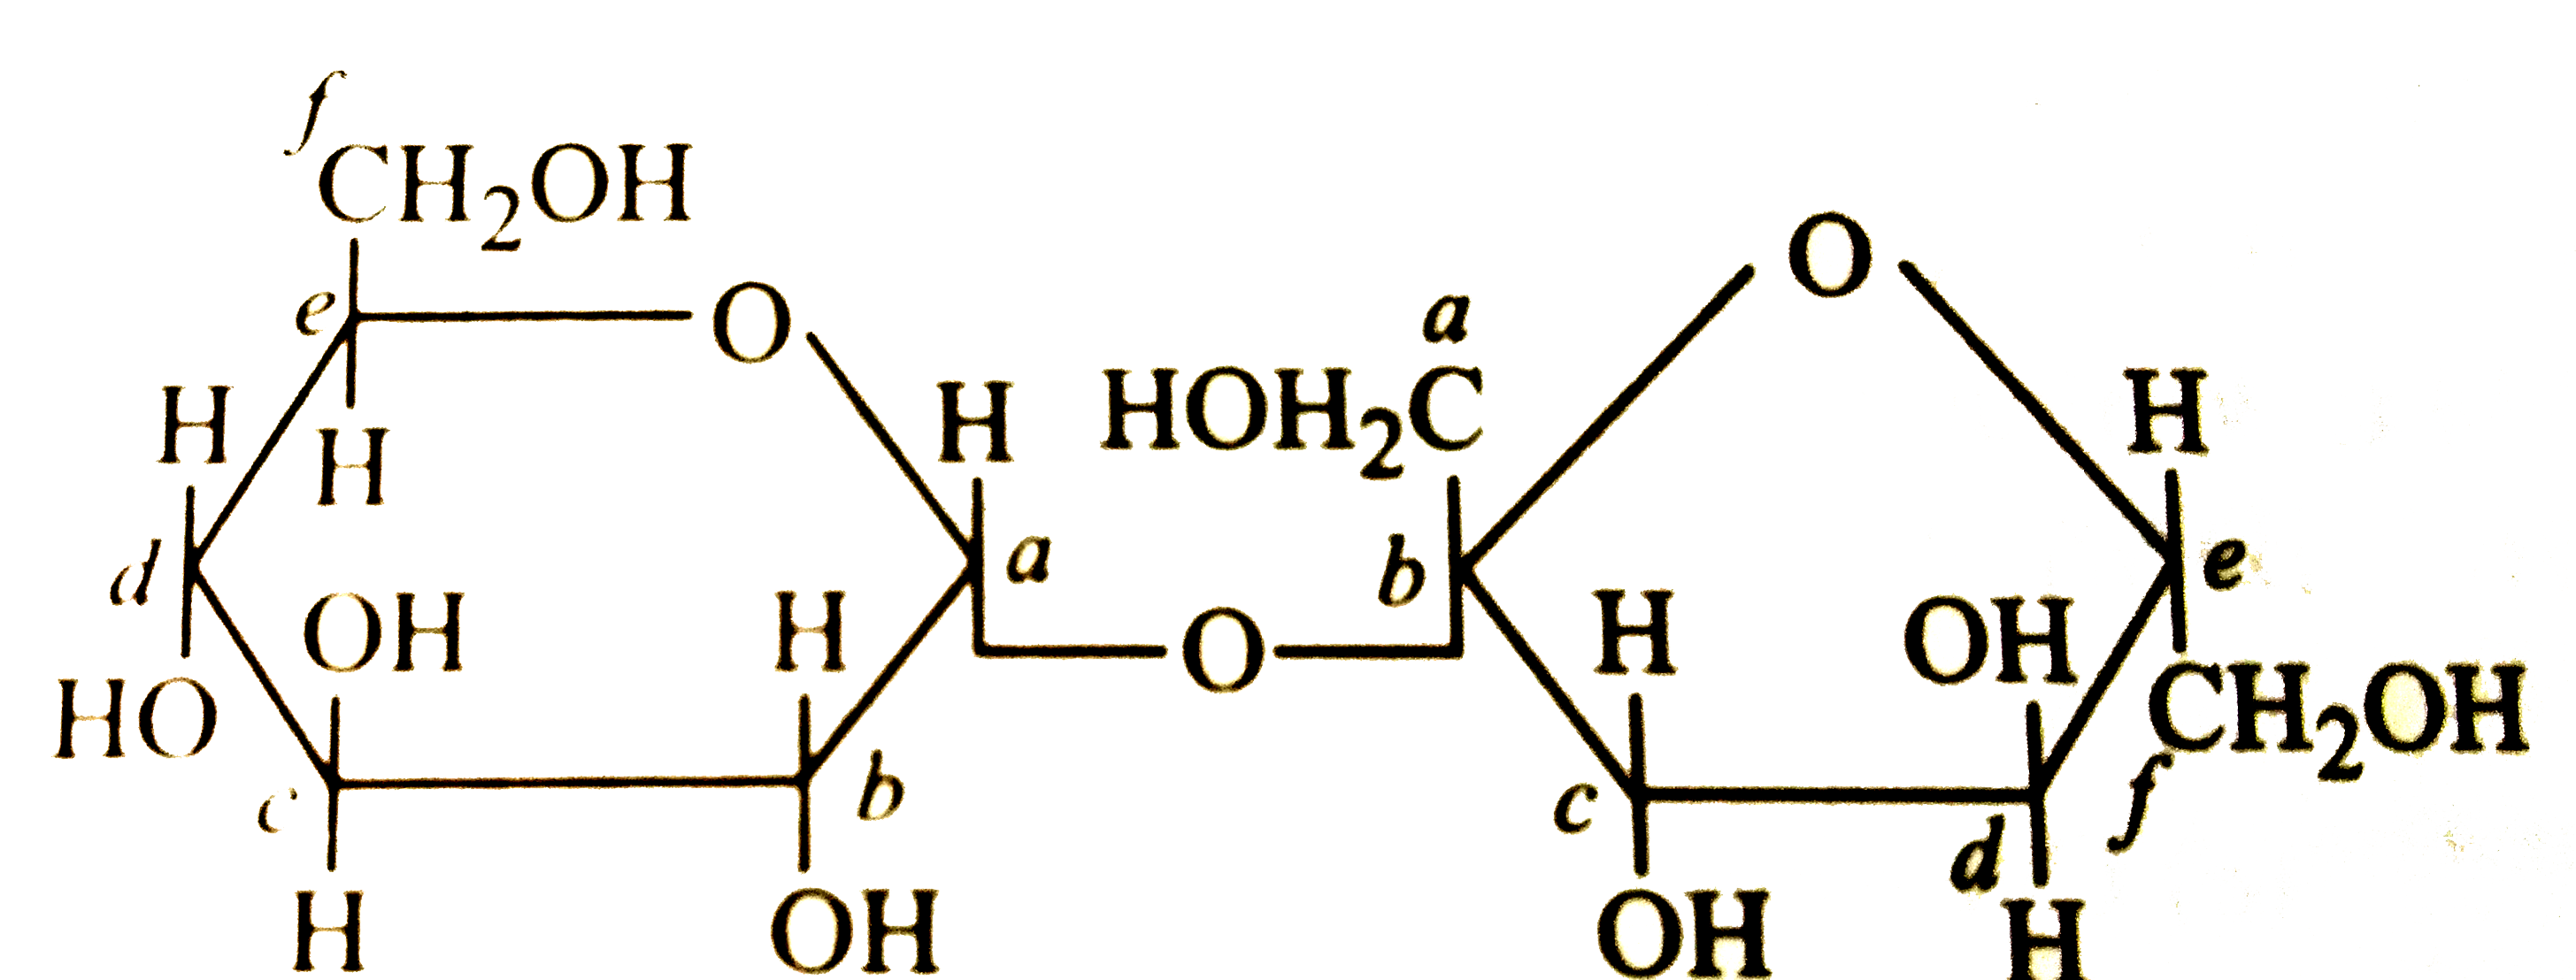 Structure of a disaccharide formed by glucose and fructose is given below. Identify anomeric carbon atoms in monosaccharide units.